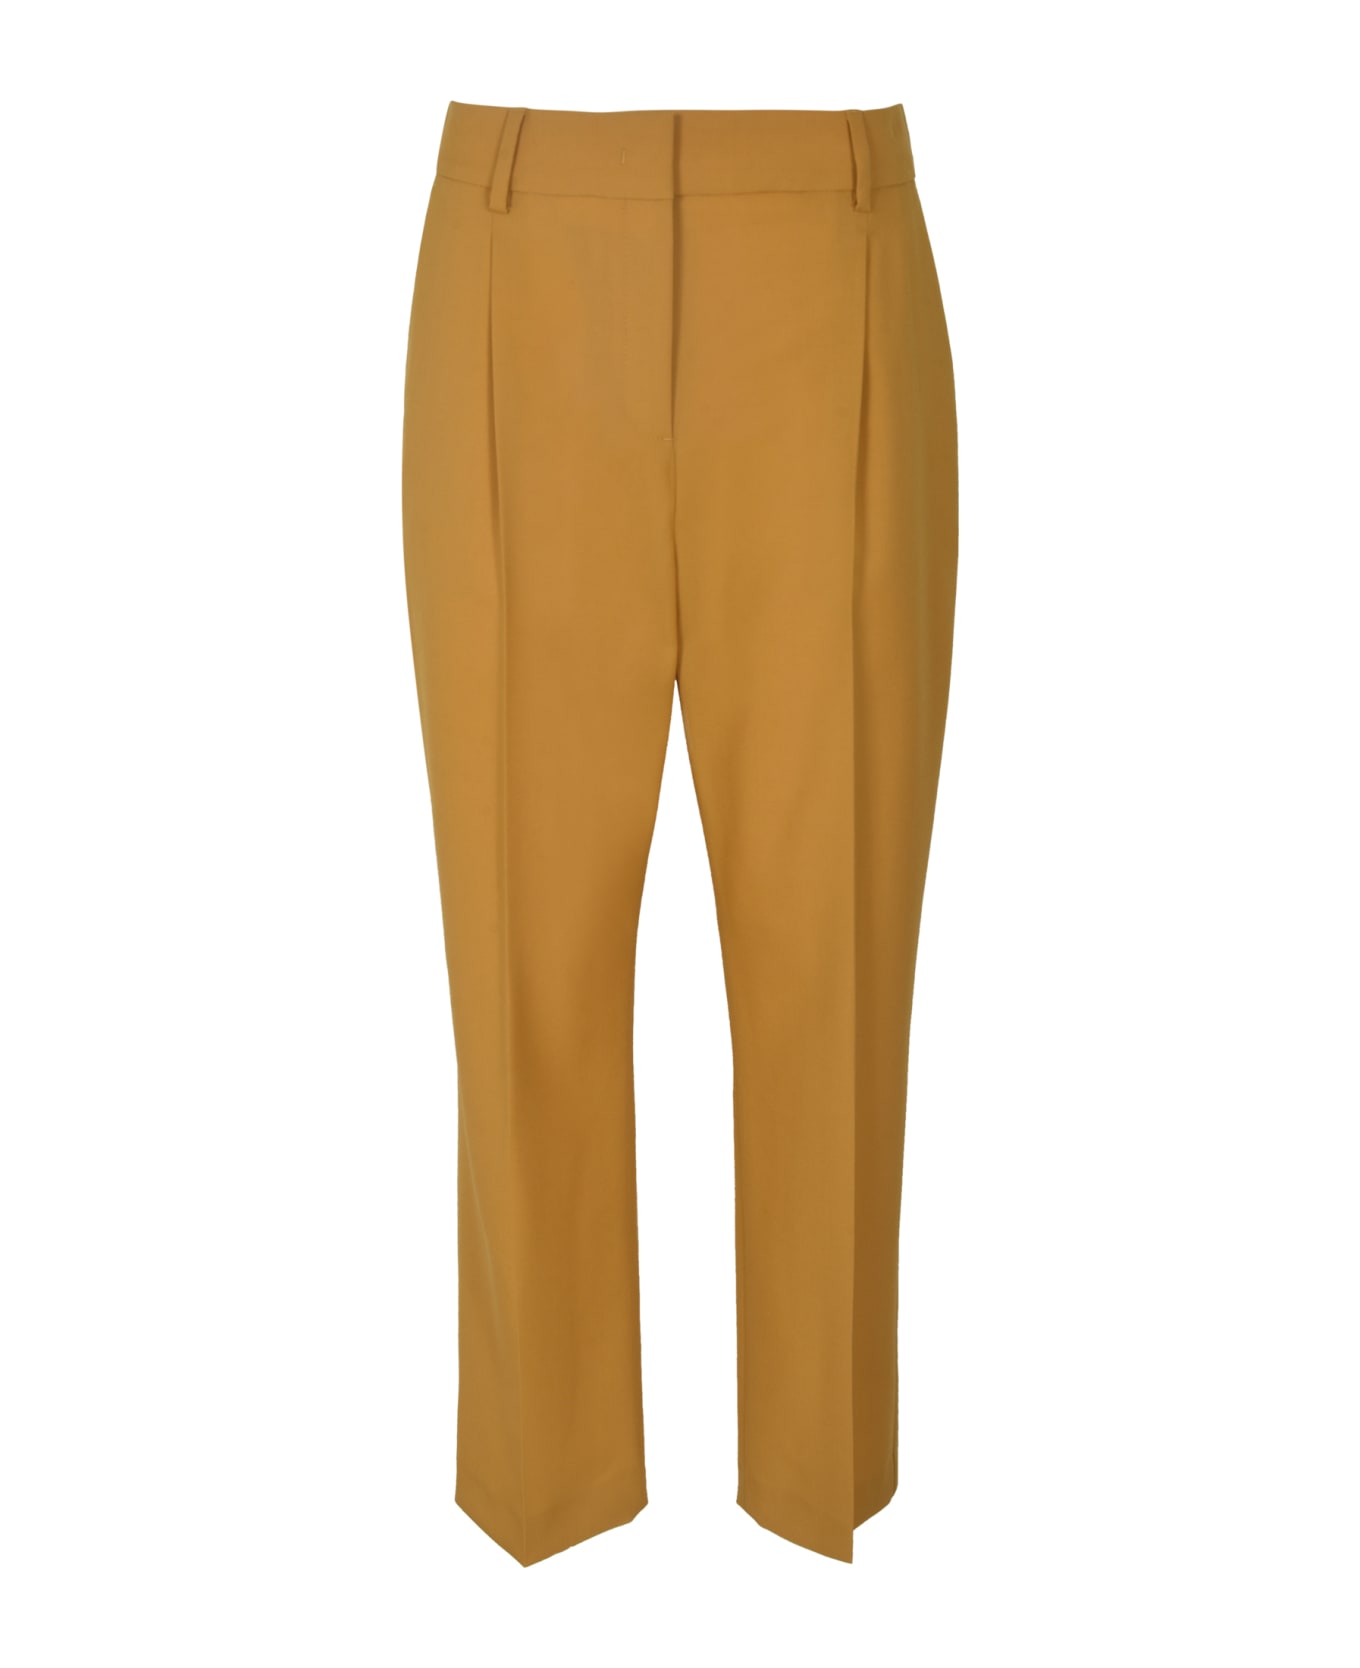 Paul Smith Concealed Trousers - 100% Wool